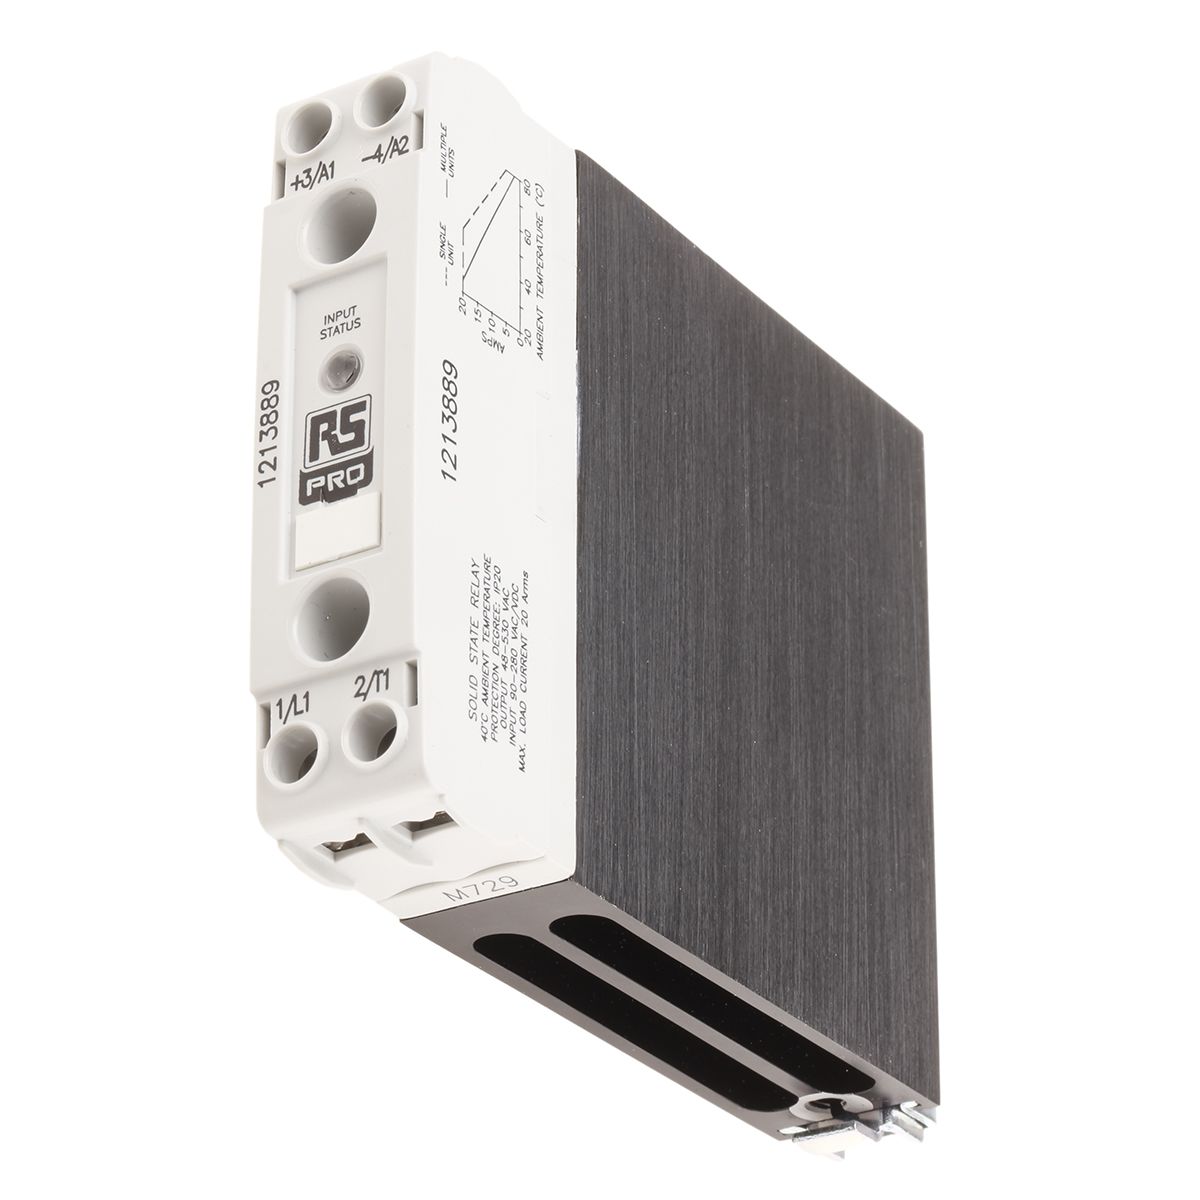 RS PRO DIN Rail Solid State Relay, 20 A Max. Load, 530 Vrms Max. Load, 280 V ac Max. Control